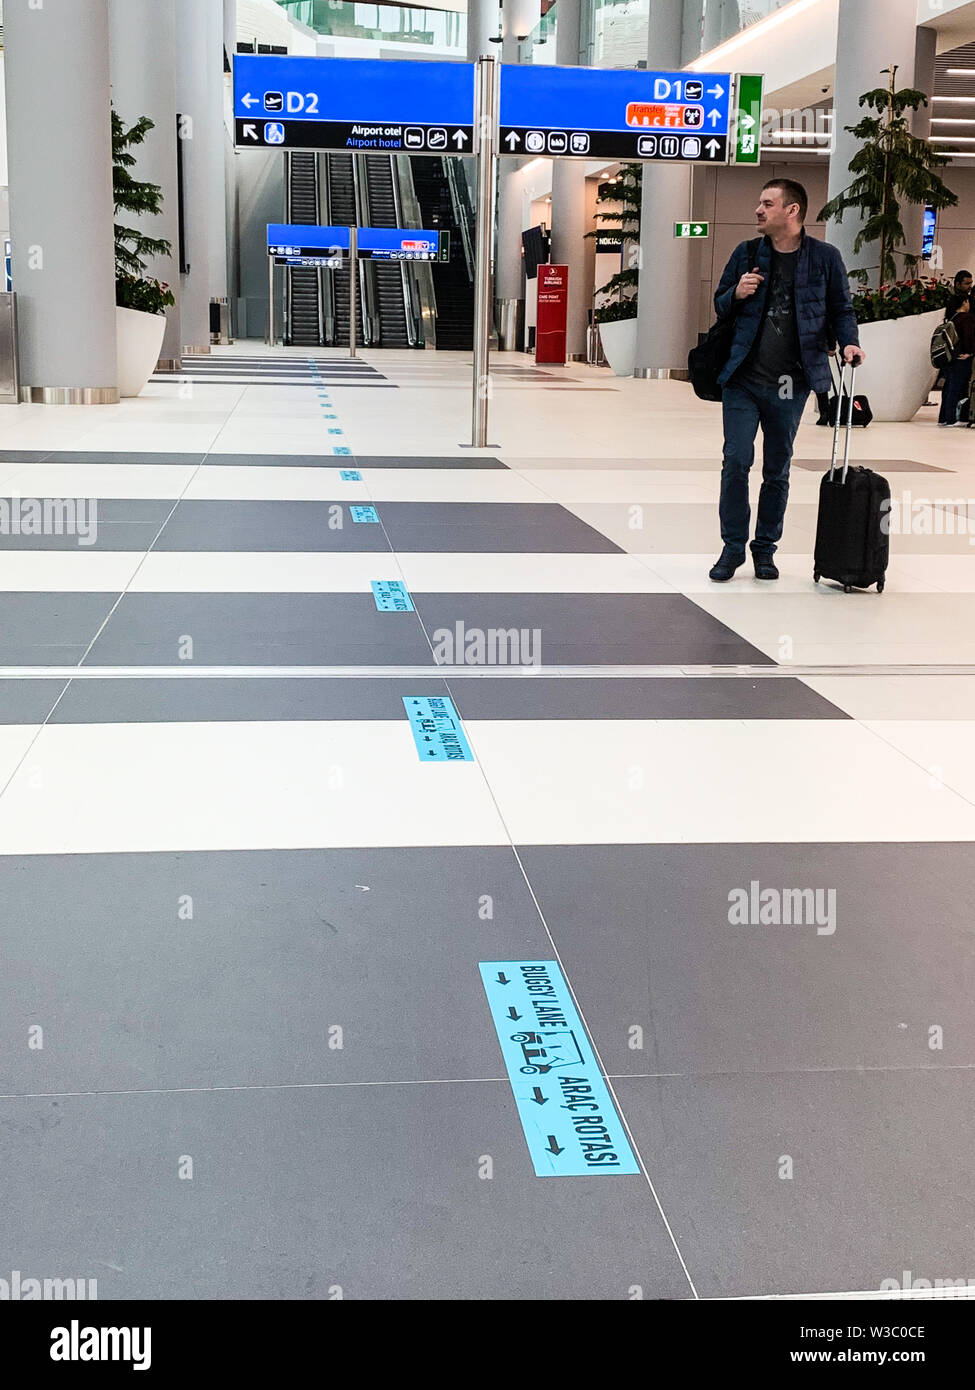 Buggy Lane with a symbol on the floor in English and Turkish language. Path for buggies only, to transport people as free service of a good airport. I Stock Photo